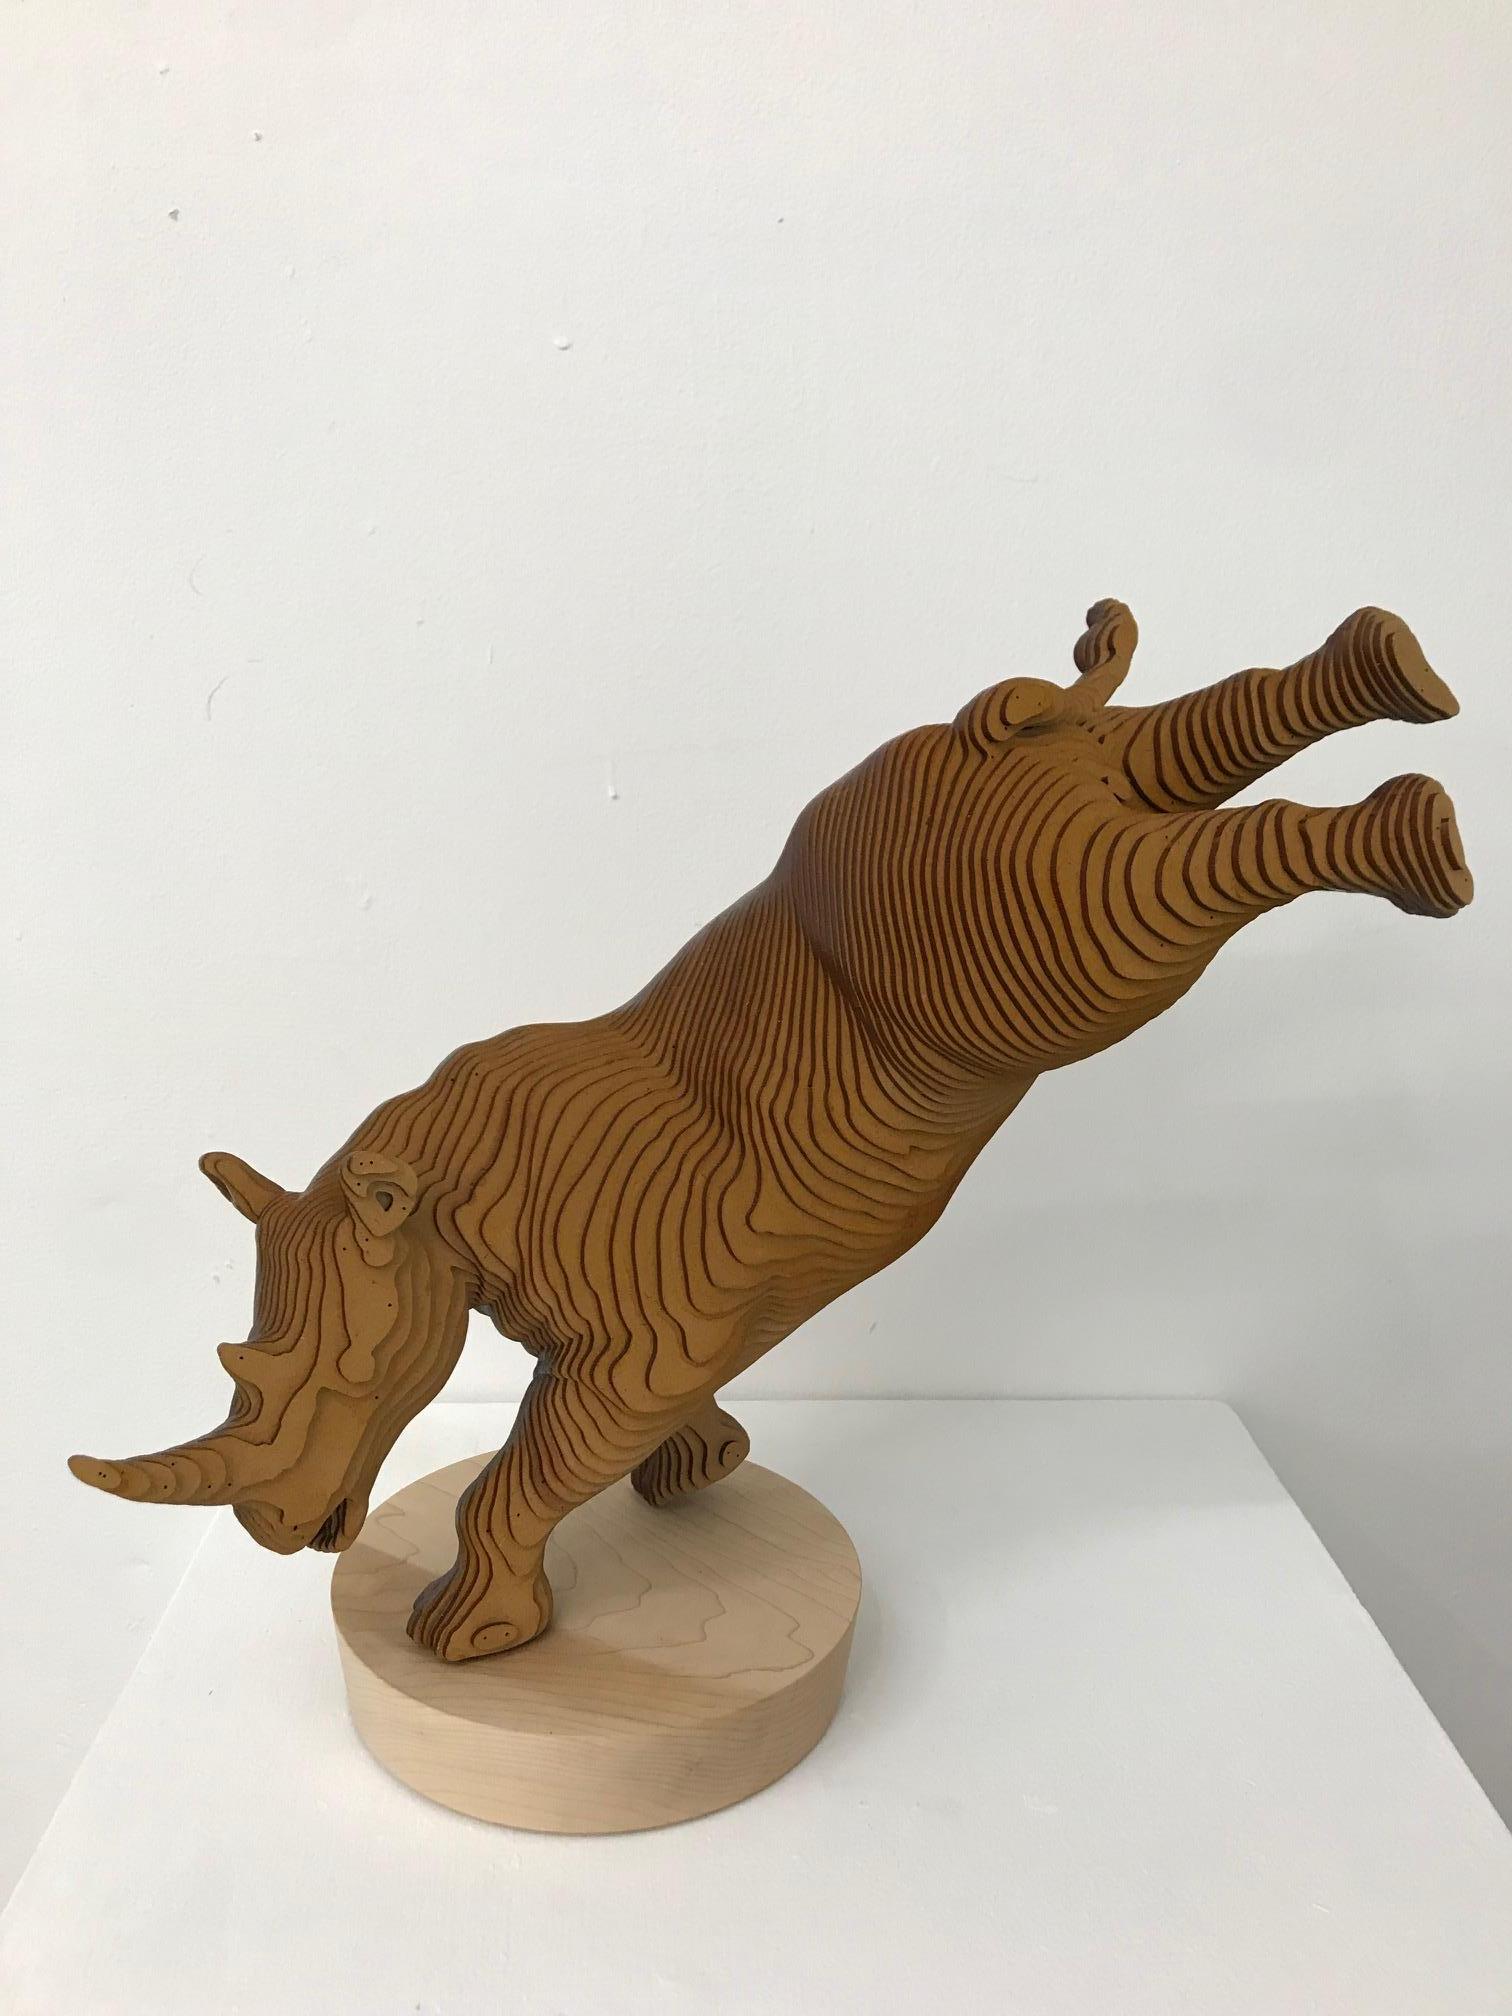 Ballerhino..Contemporary whimsical animal sculpture, wood slices, dancing rhino - Sculpture by Olivier Duhamel